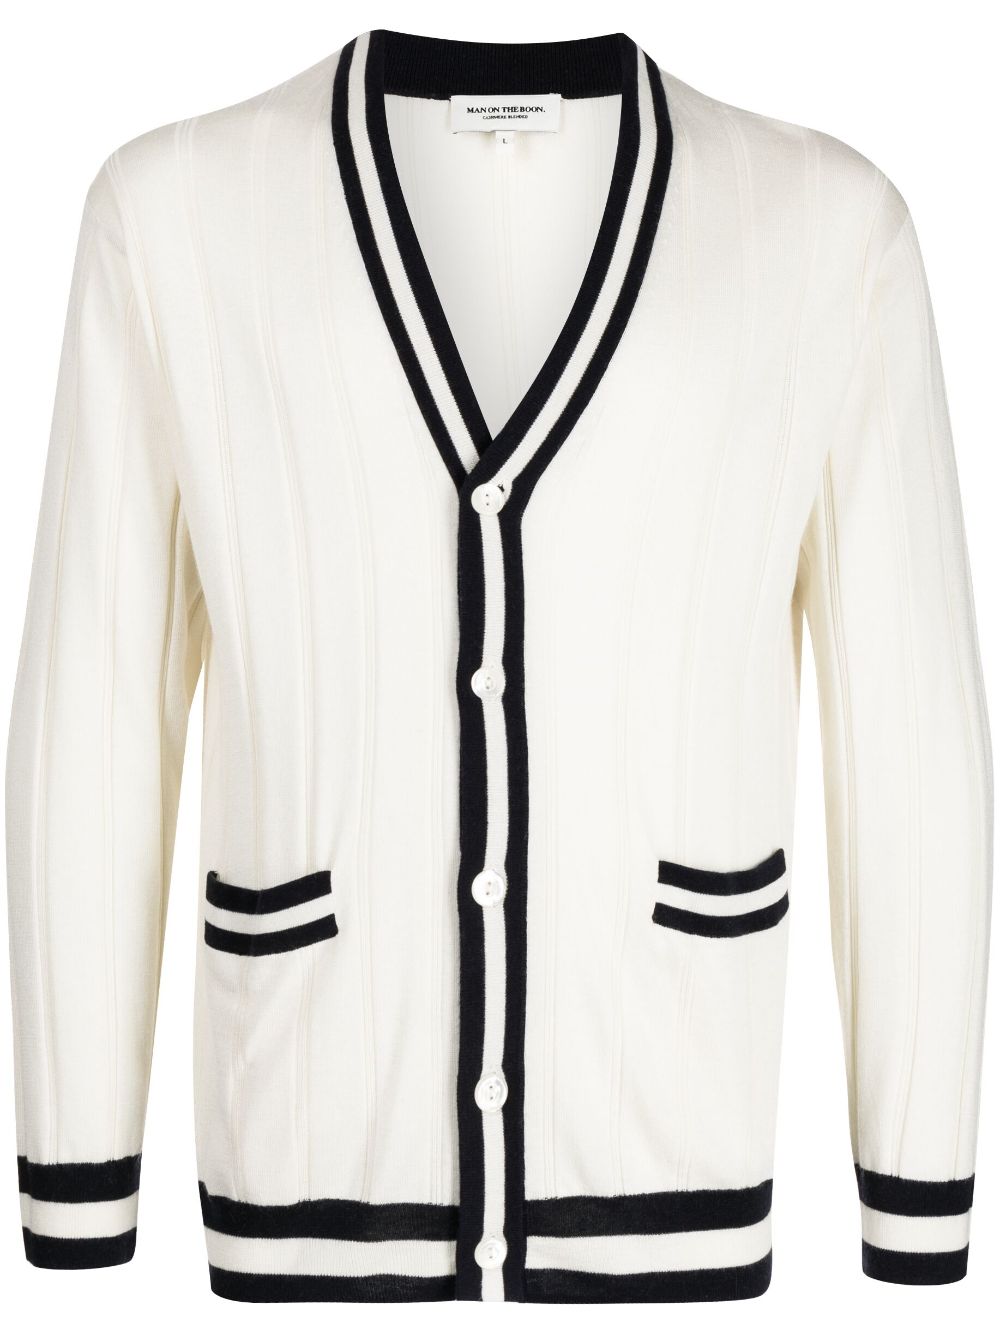 Man On The Boon. two-tone buttoned cardigan - White von Man On The Boon.